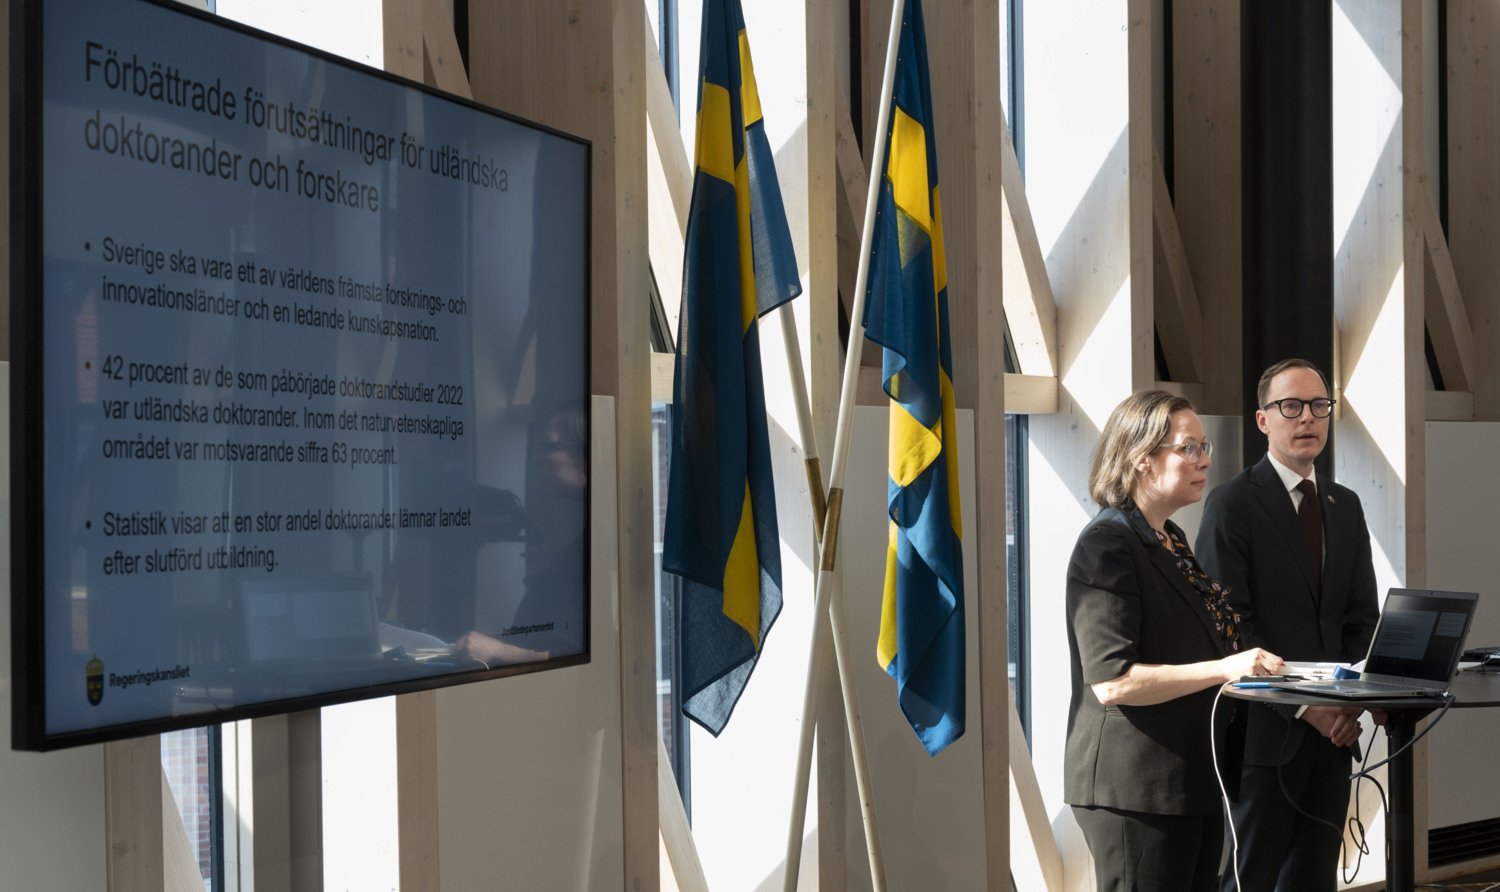 Press conference with ministers Maria Malmer Stenergard and Mats Persson.